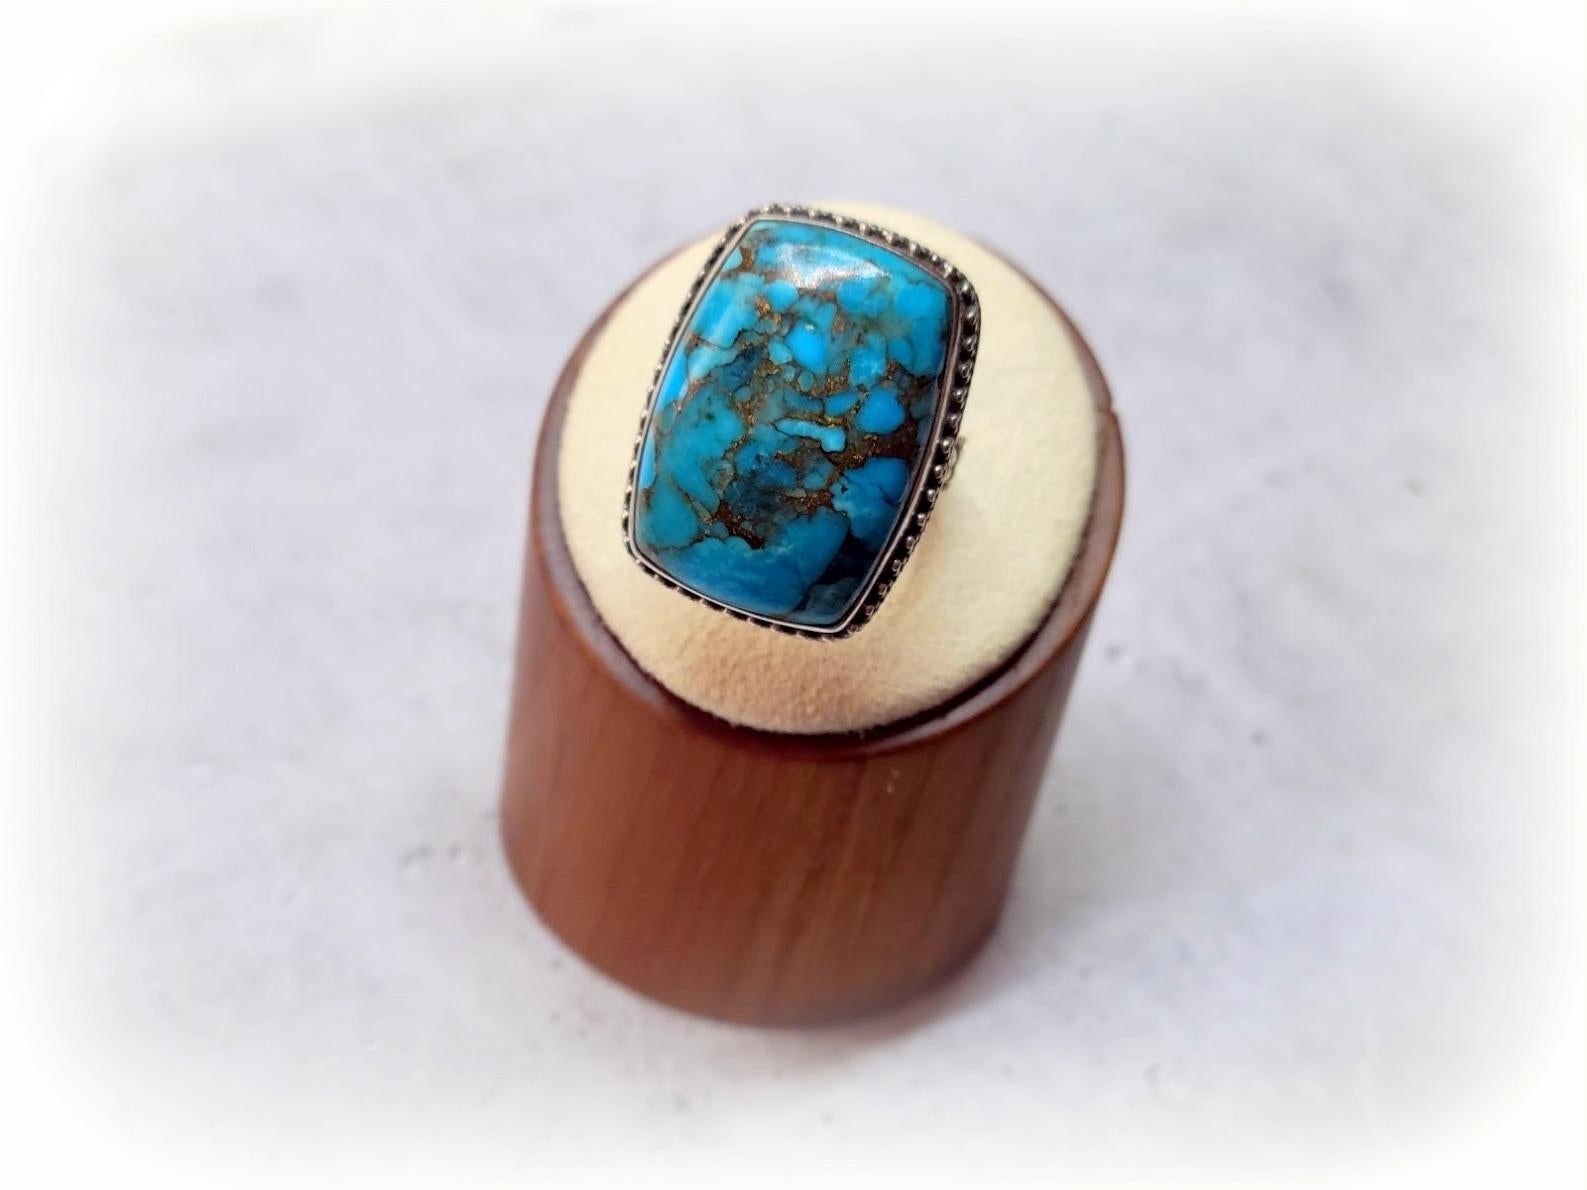 This beautiful, rare, comfortable ring is made from a high-quality Arizona Morenci turquoise cabochon in the sterling silver set.

The Morenci turquoise stone is approximately 26mm x 17.6mm
The US size of the ring is 7.
The weight of the ring is